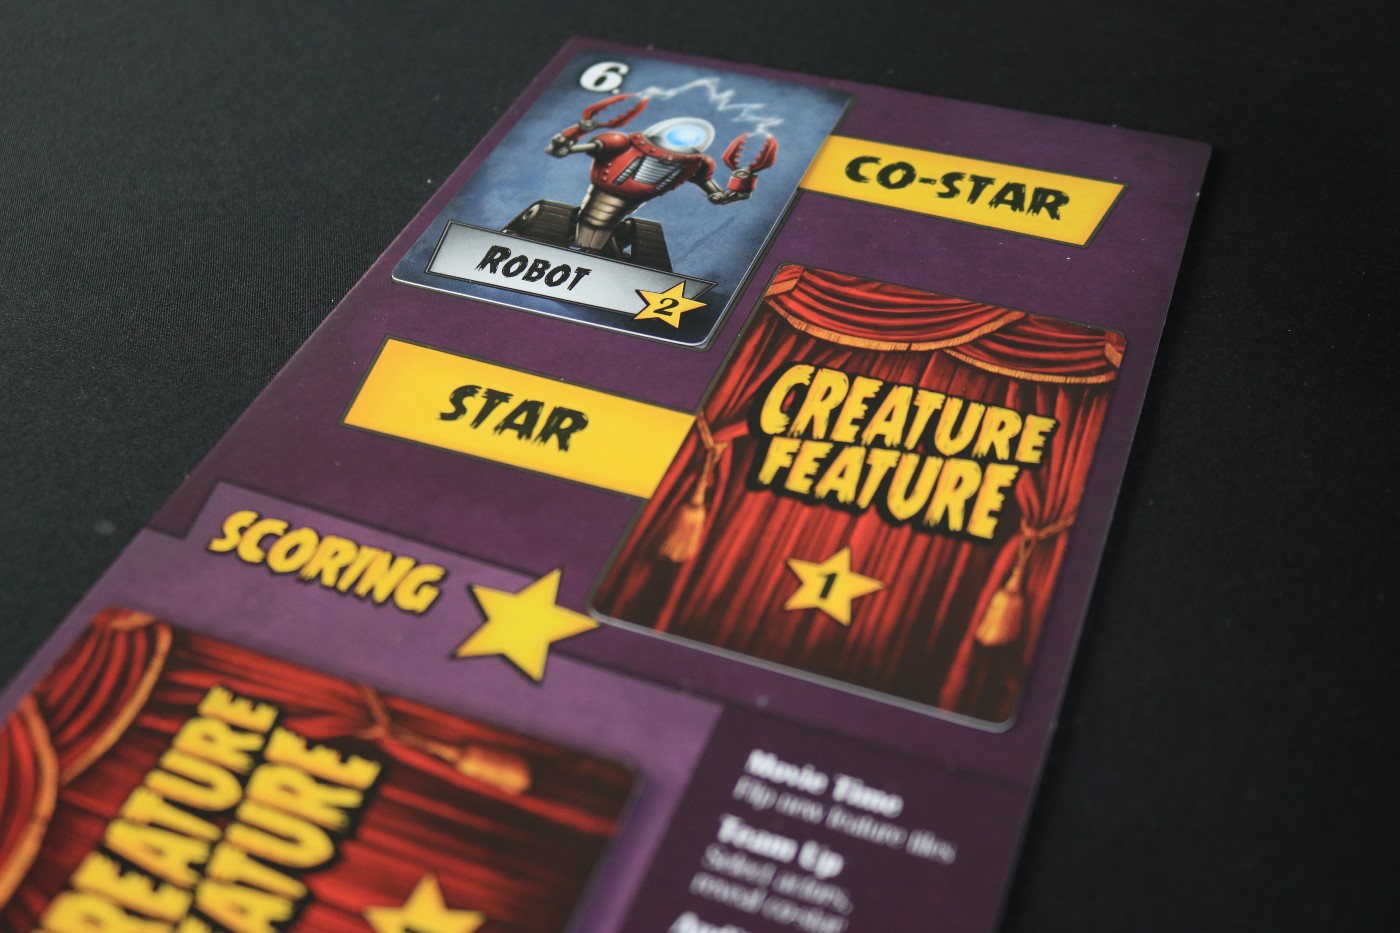 Creature Feature player board